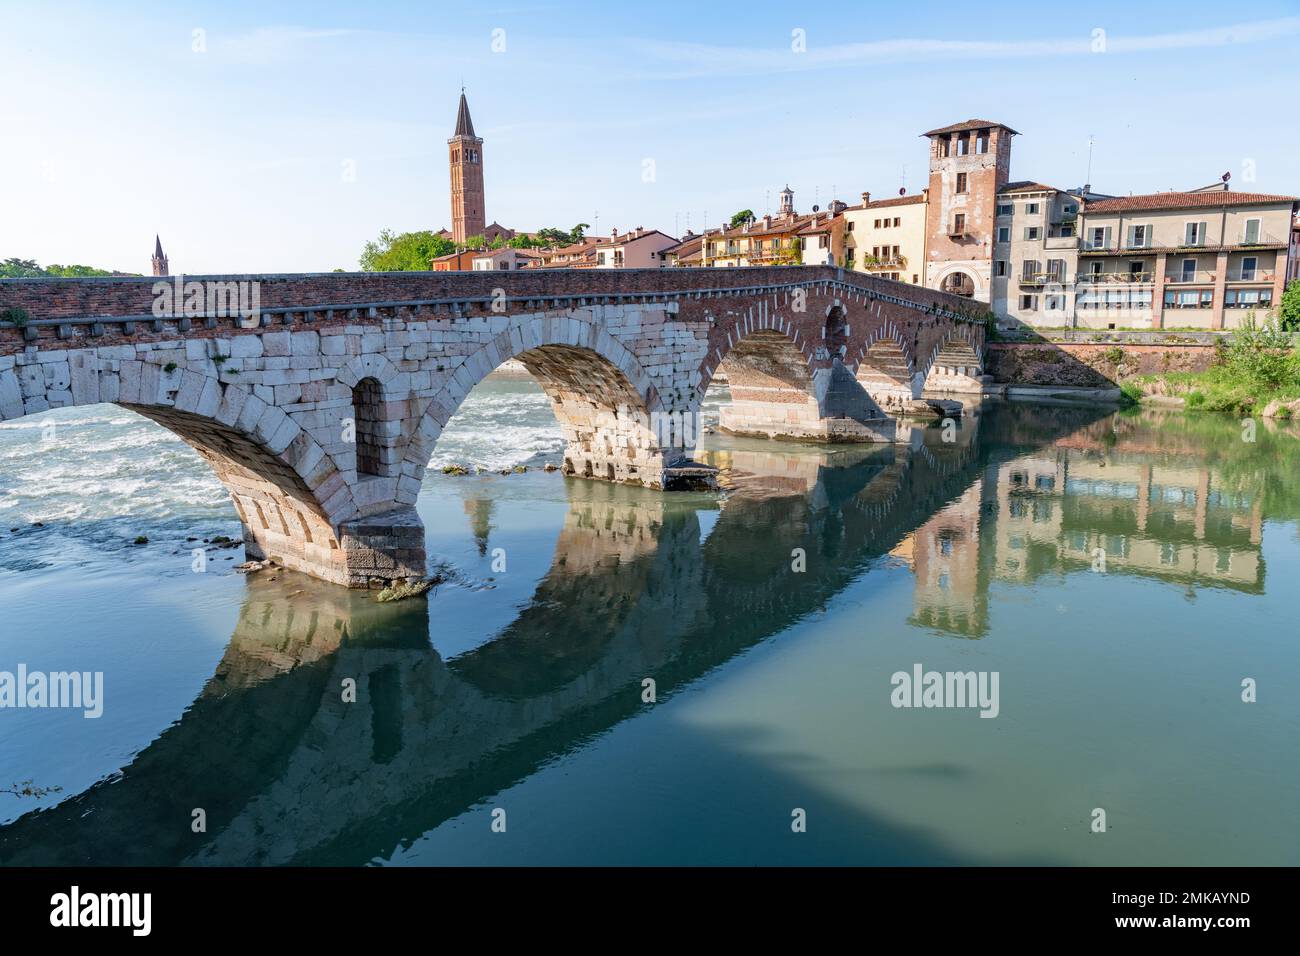 Water flowing under the arches of the Ponte Pietra bridge which spans the Fiume Adige in Verona, Italy set against clear blue skies. The bridge is in Stock Photo